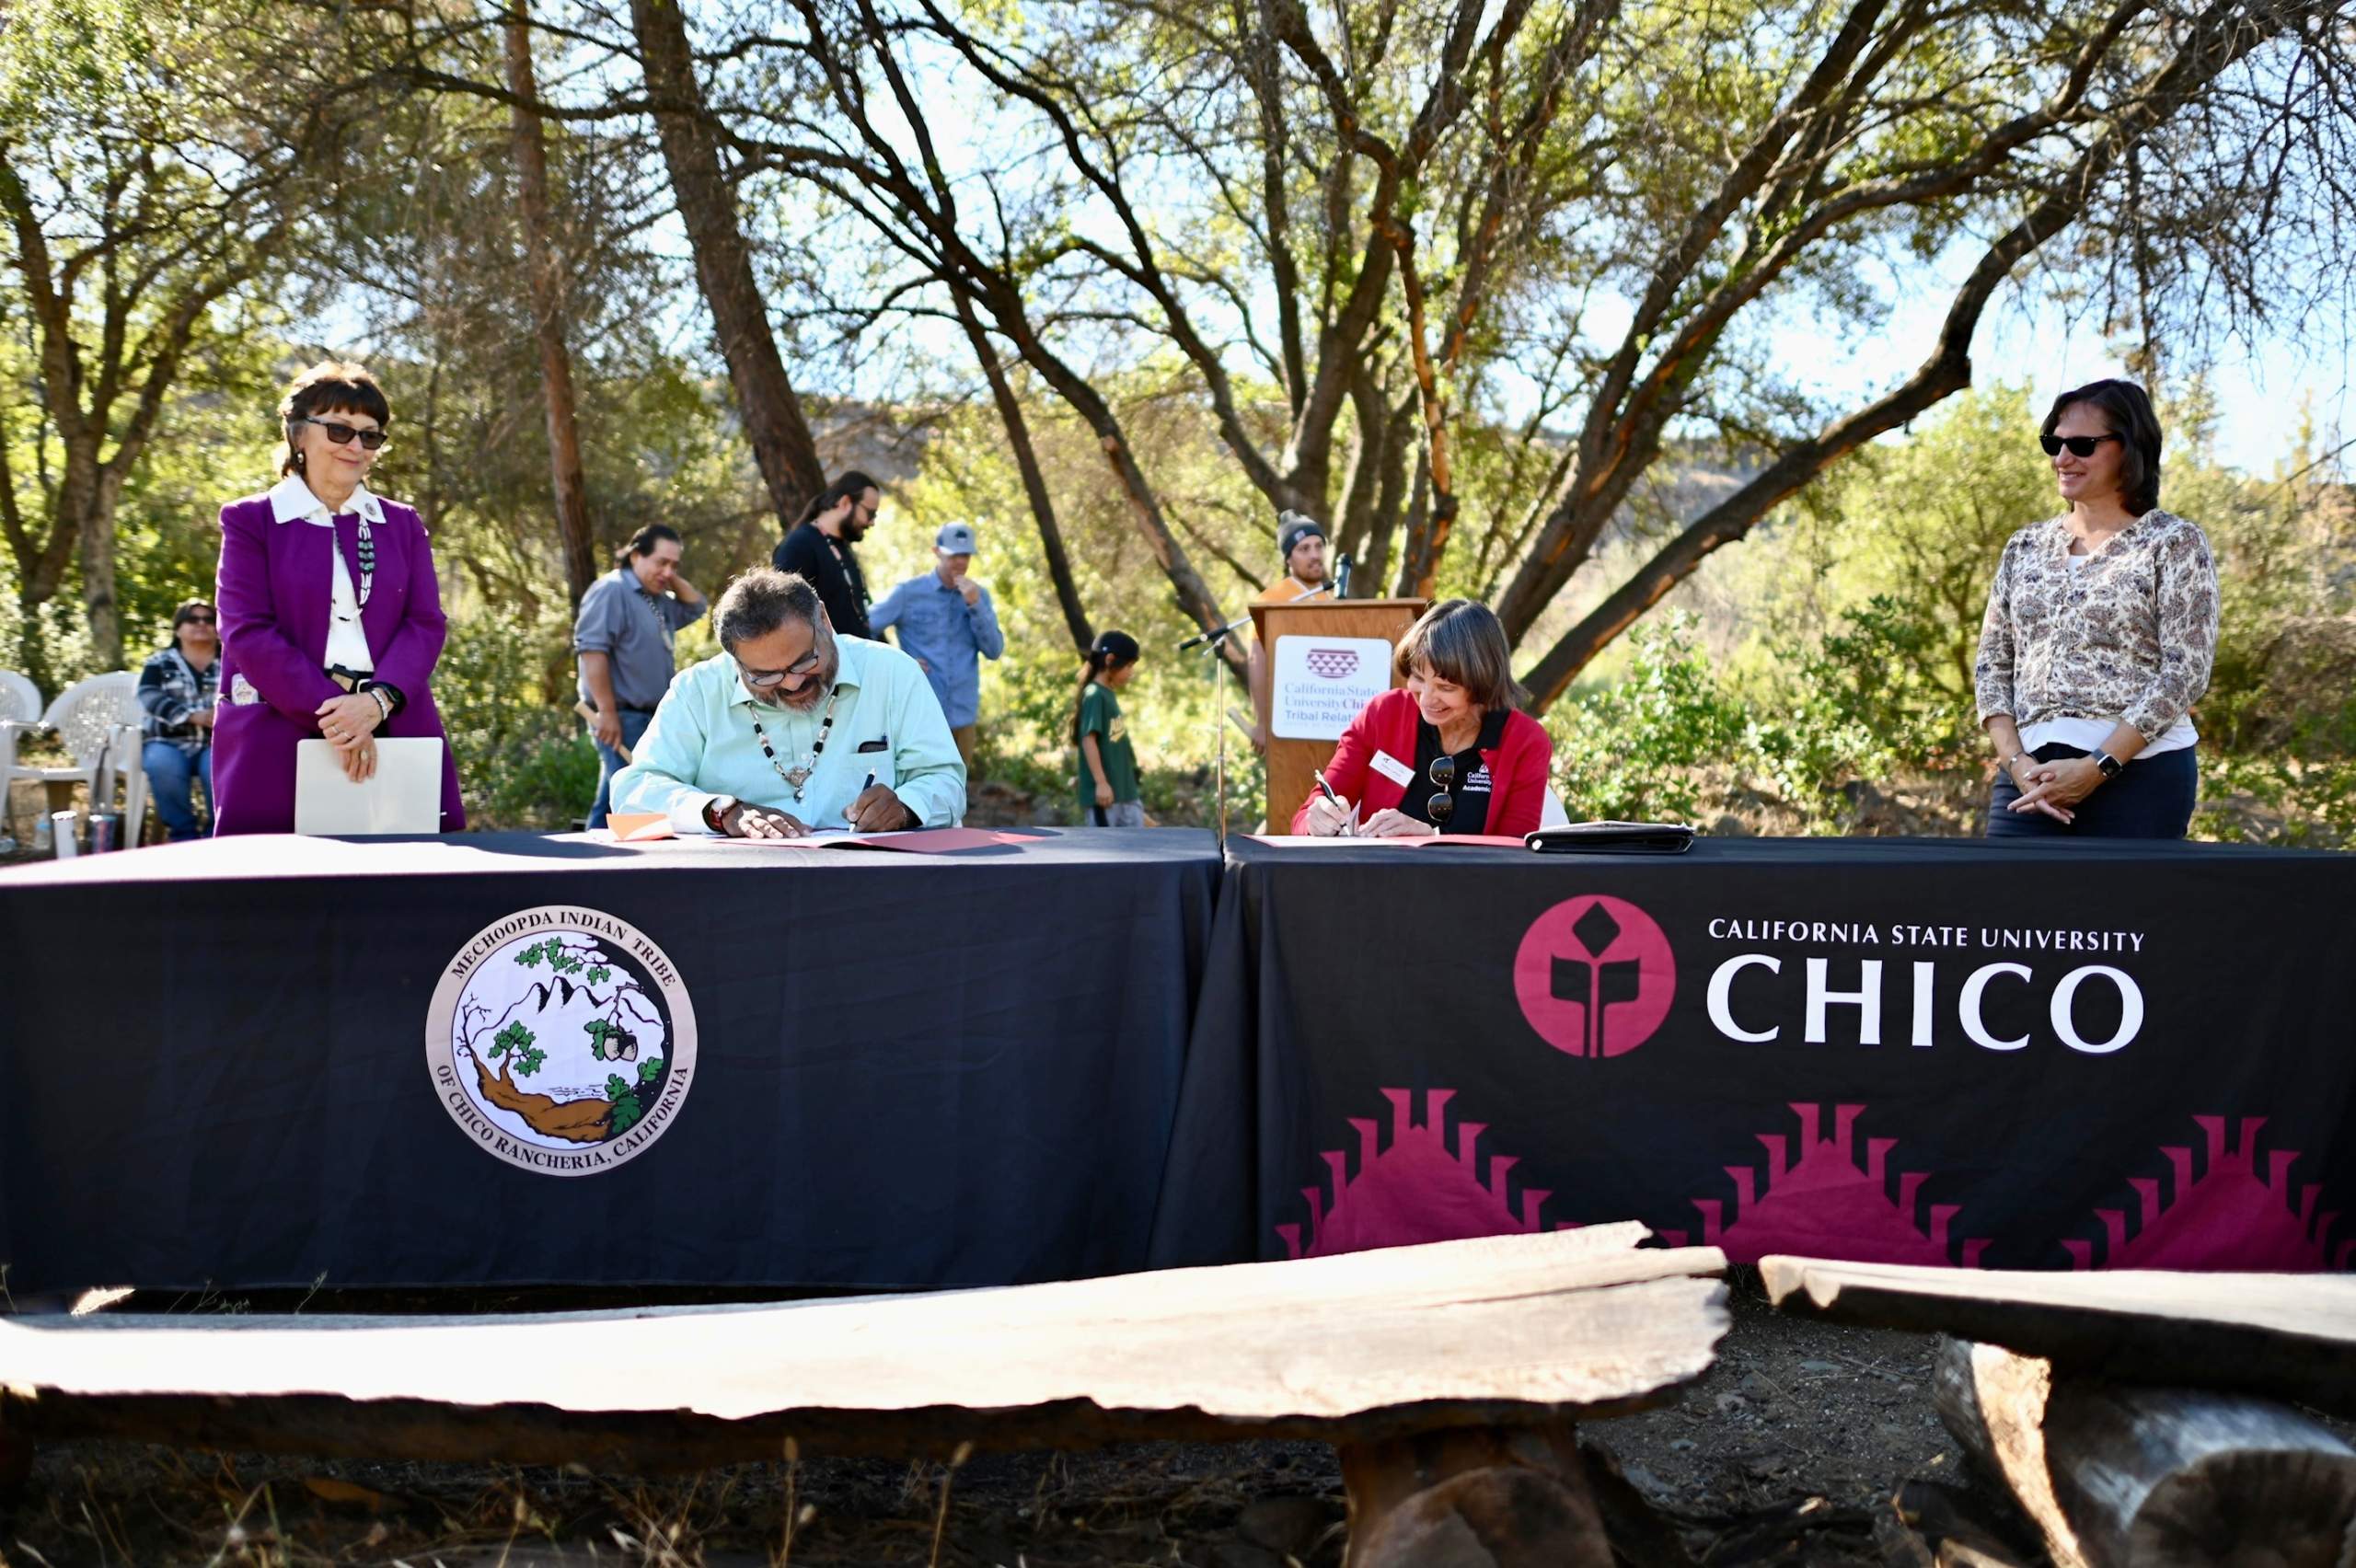 From left: Chico State President Gayle Hutchinson looks on as Mechoopda Tribal Chairman Dennis Ramirez and Chico State Provost Debra Larson sign the celebratory agreement documents to recognize the completion of the land transfer, as Wildlife Conservation Board Assistant Executive Director Rebecca Fris watches nearby.